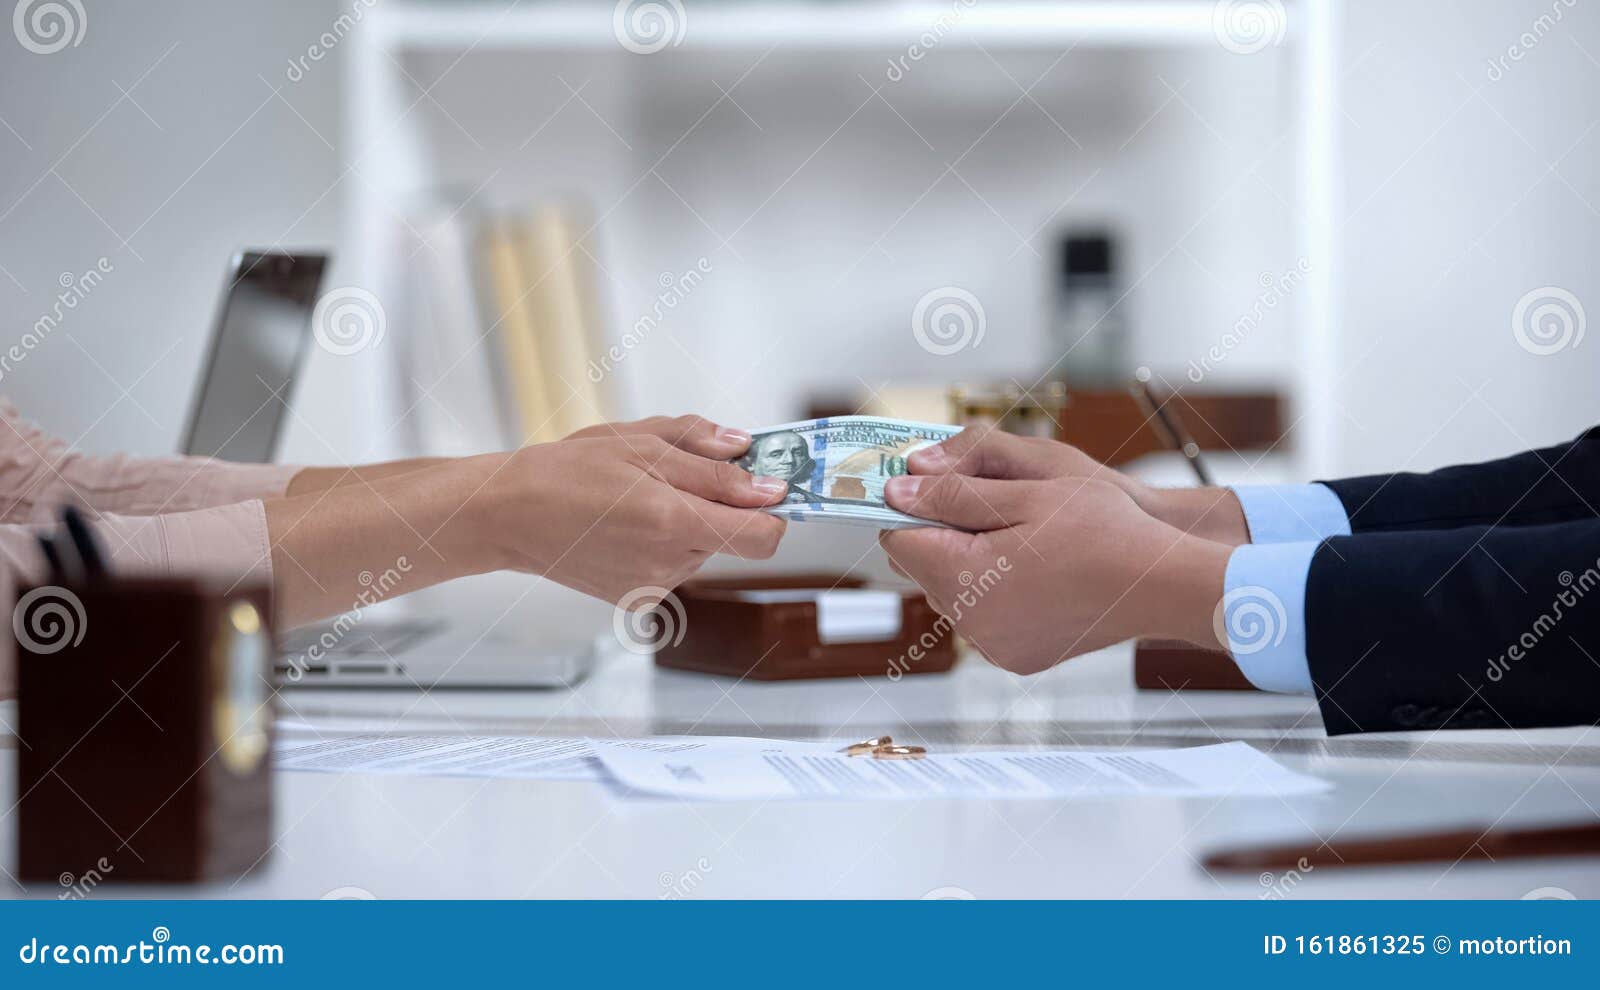 male and female hands pulling money, dividing marital property during divorce